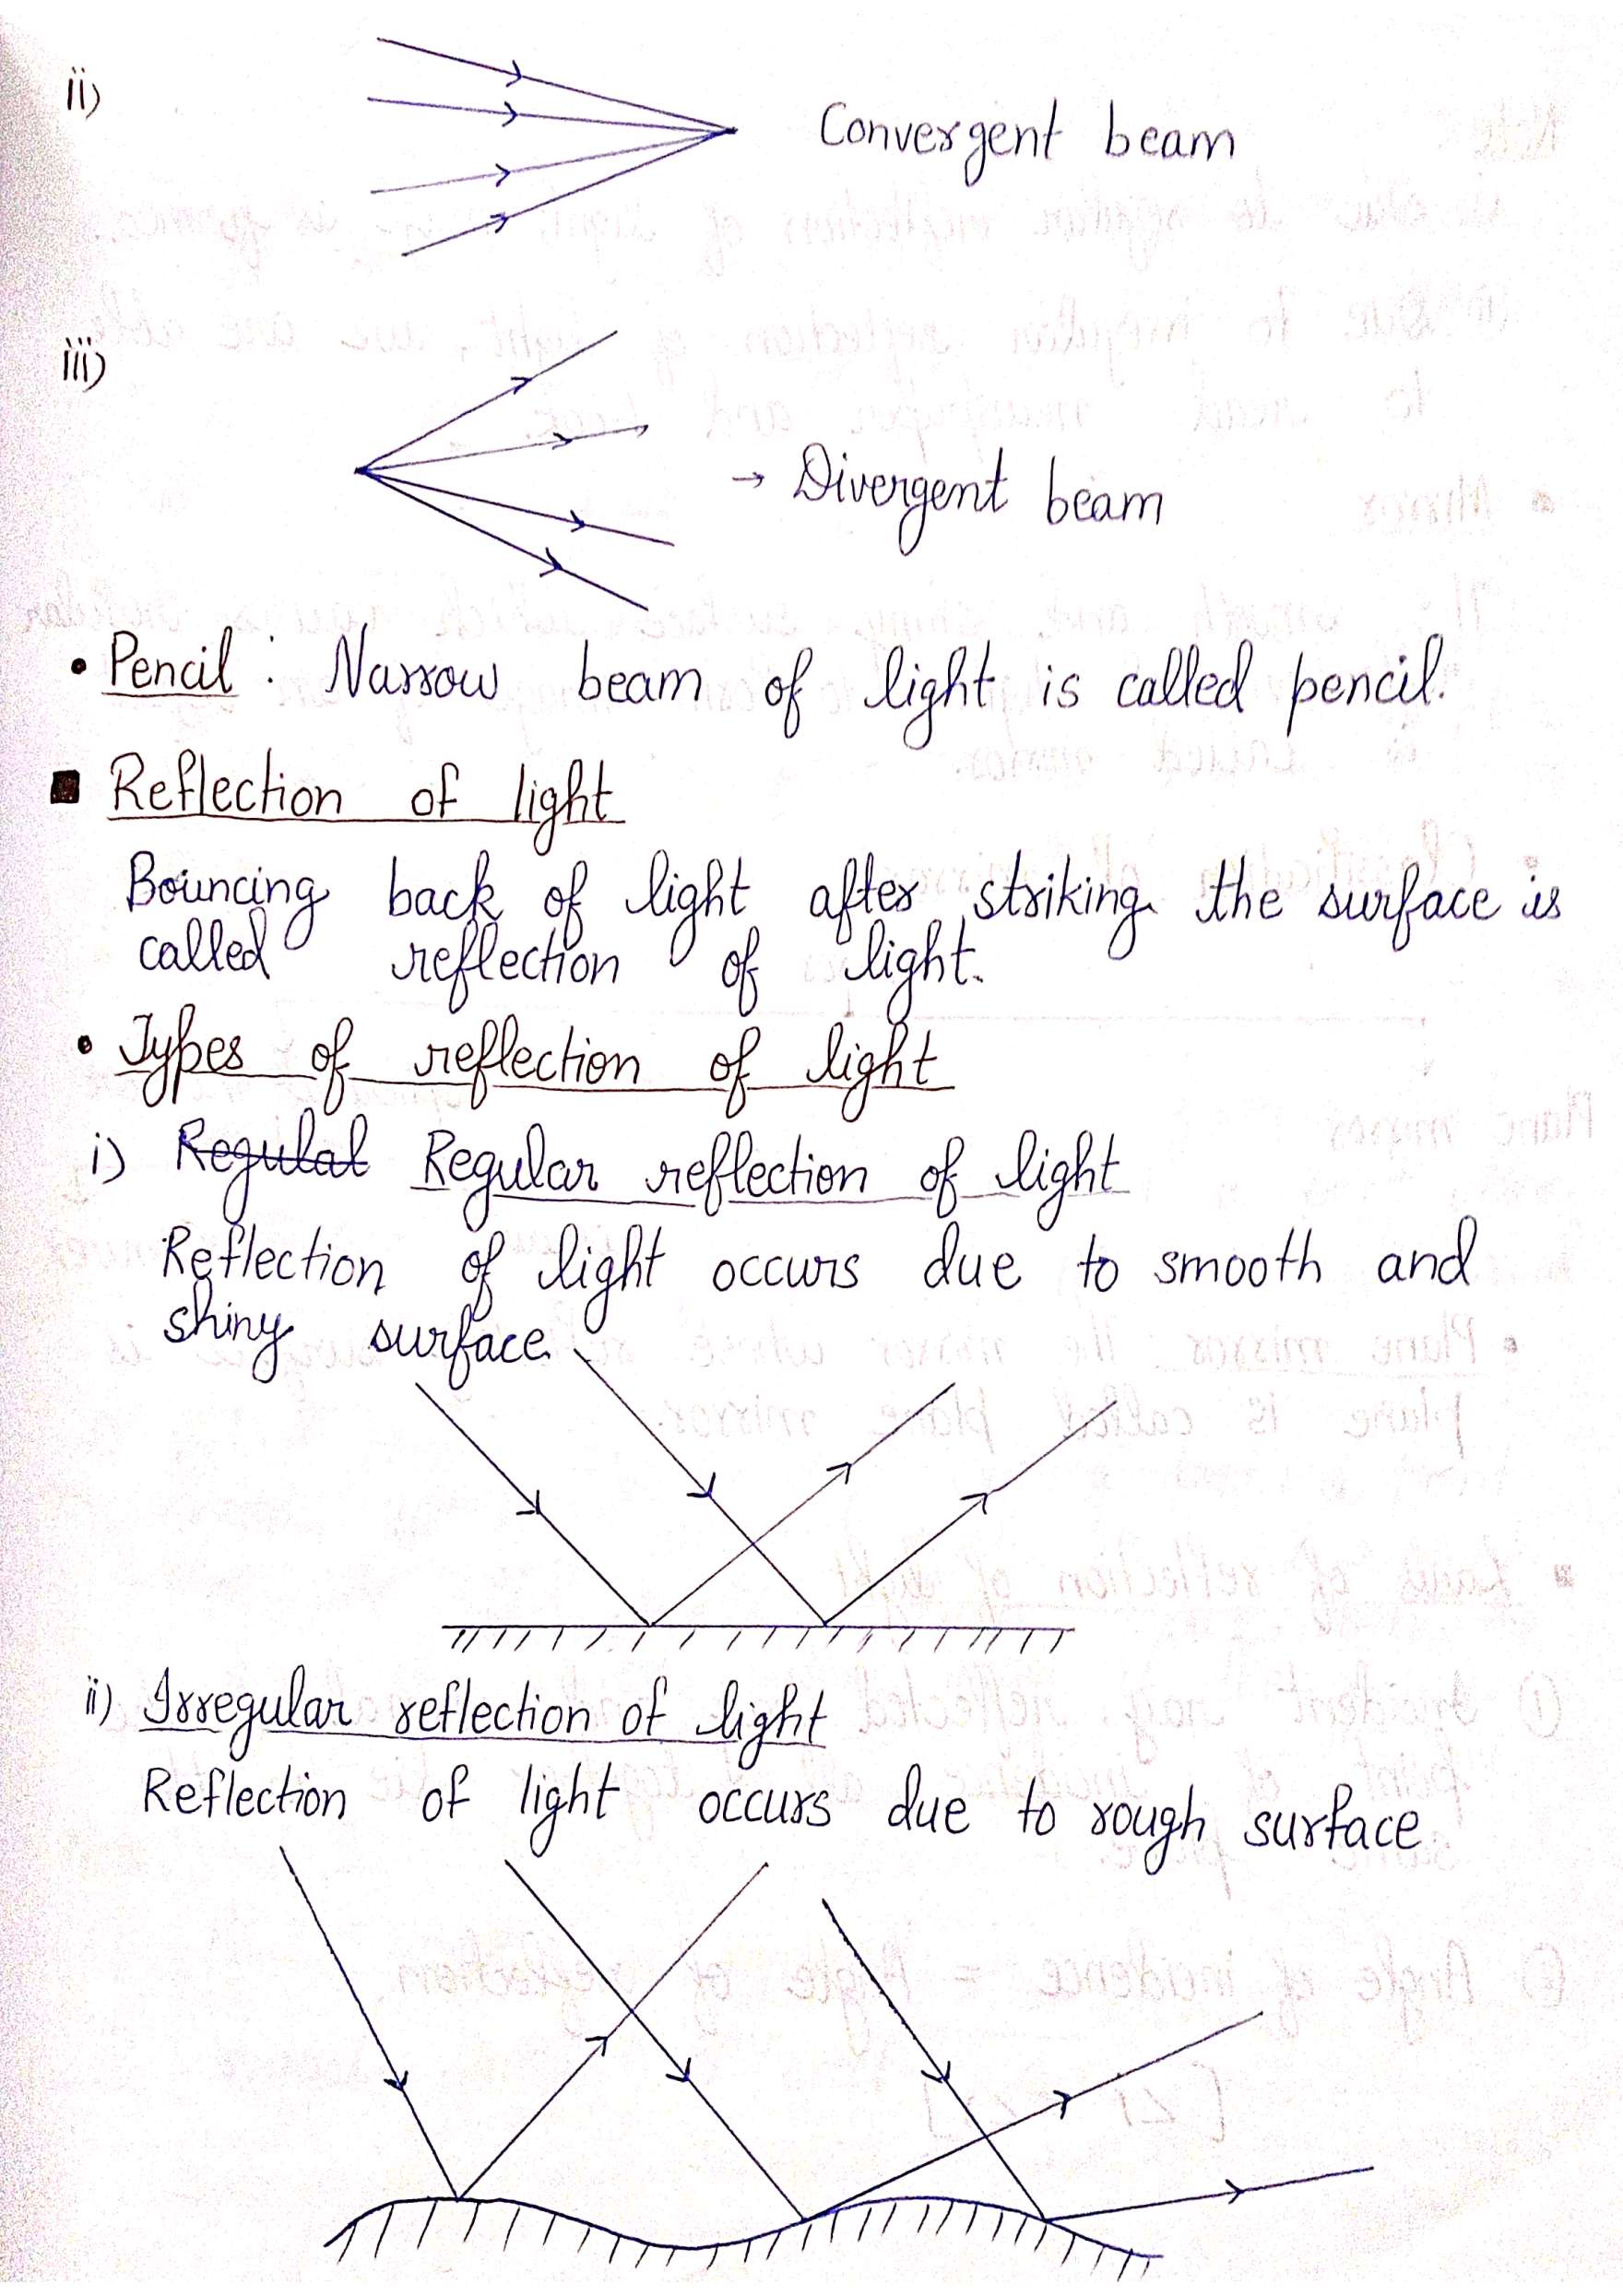 Light Reflection and Refraction Class 10 Notes Science Chapter 10